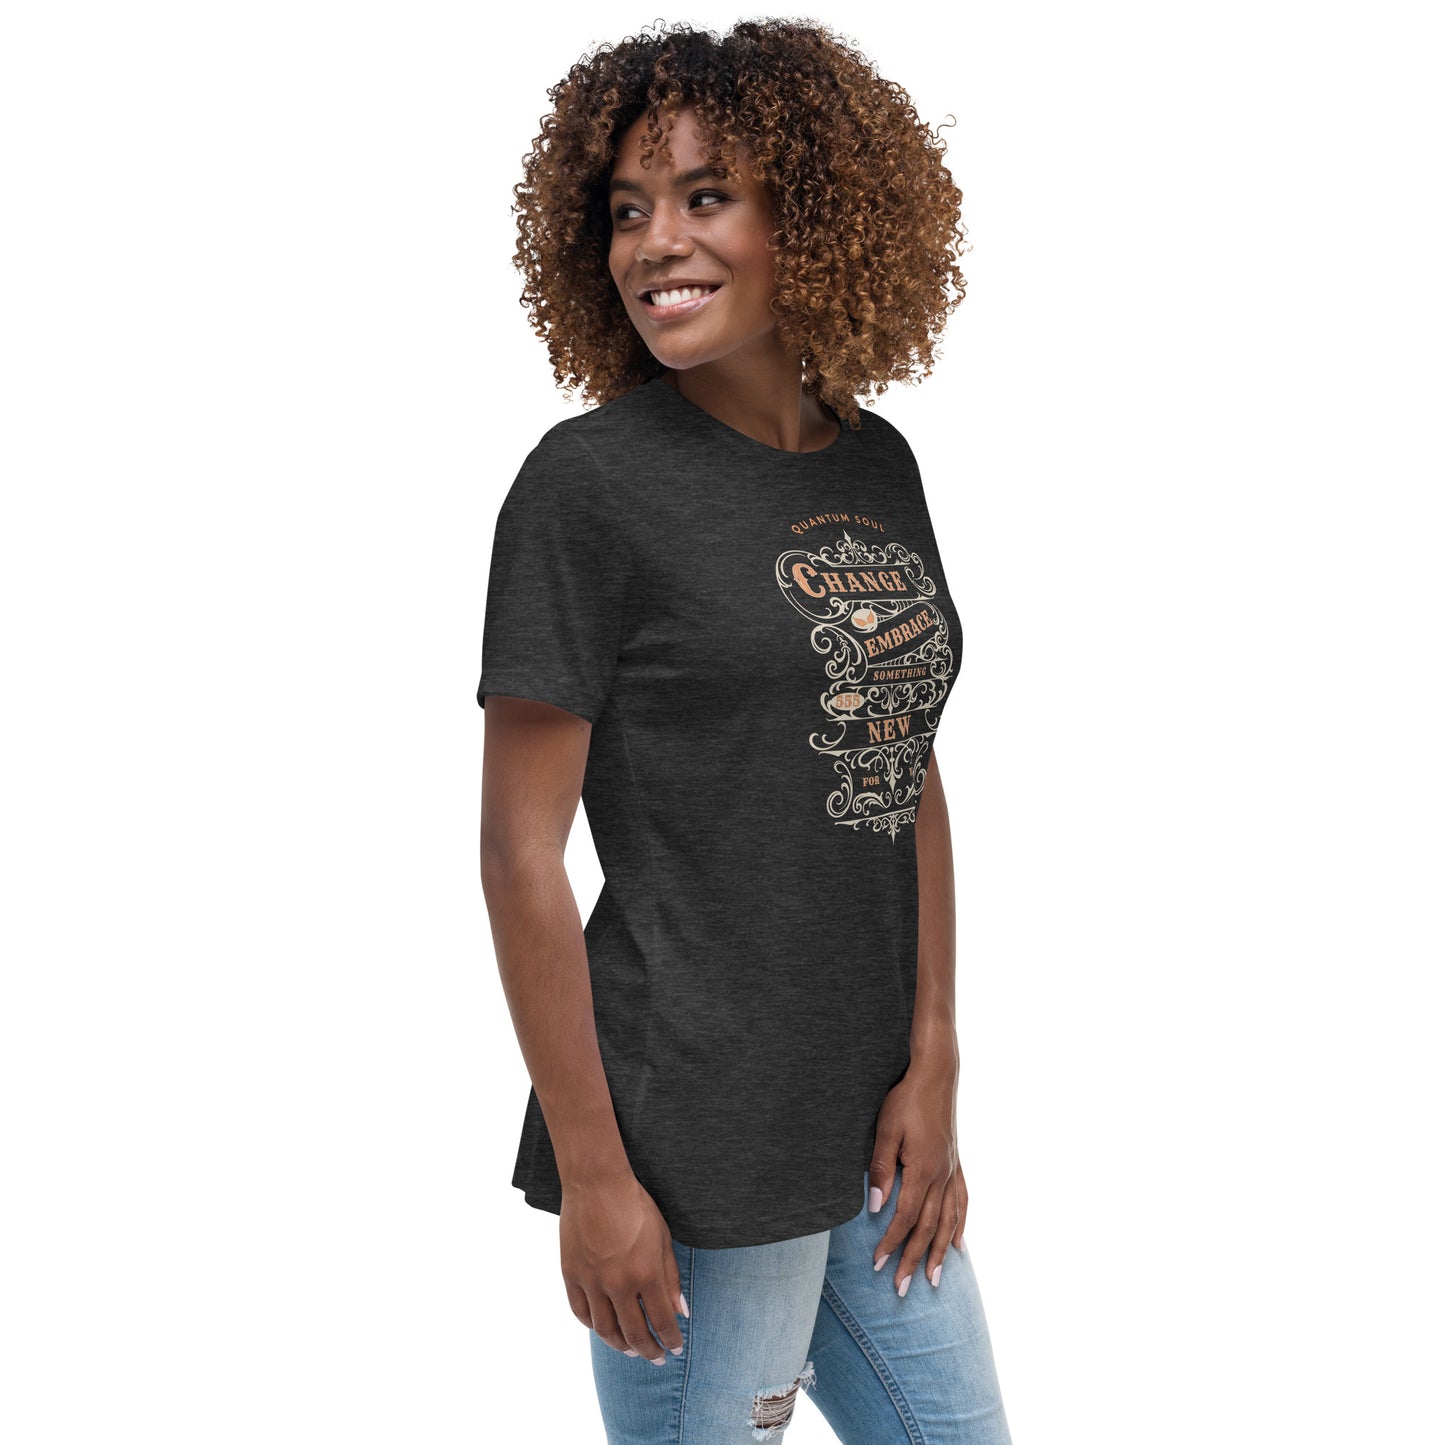 Change 555 womens-relaxed-t-shirt-dark-grey-heather-right-front